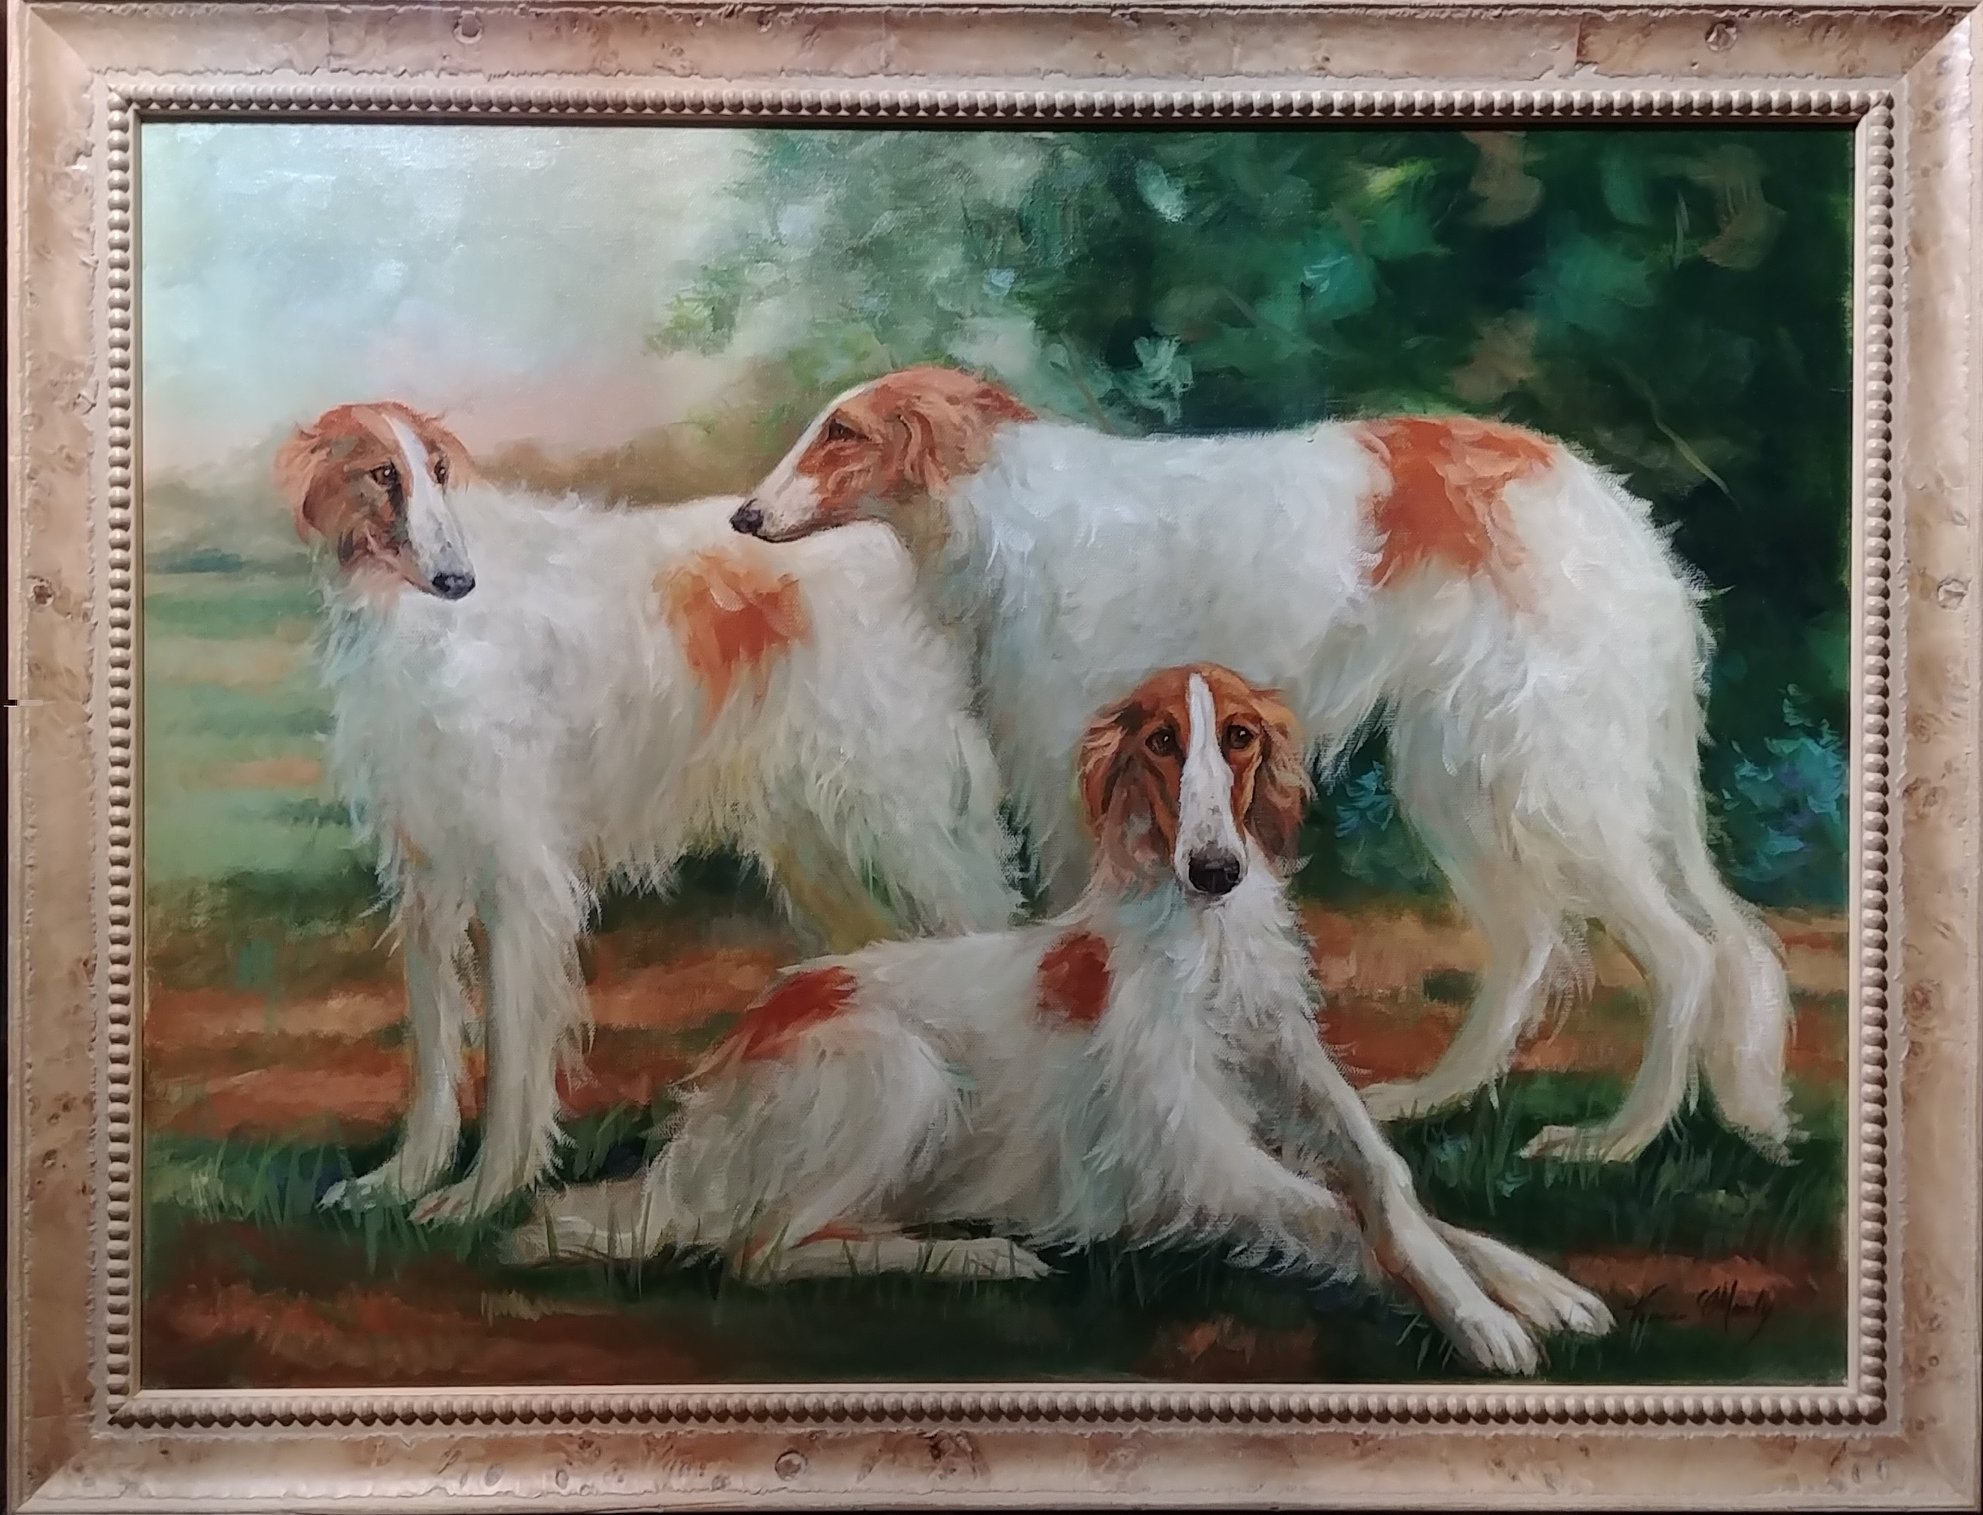 "Russian Girls" by Artist Vivian Moody. Oil on Canvas (2006) Gift of Hutchinson Kennel Club to The American Kennel Club Museum of the Dog in Memory of Asa Mays, D.V.M. Sold at Auction April 23, 2019.